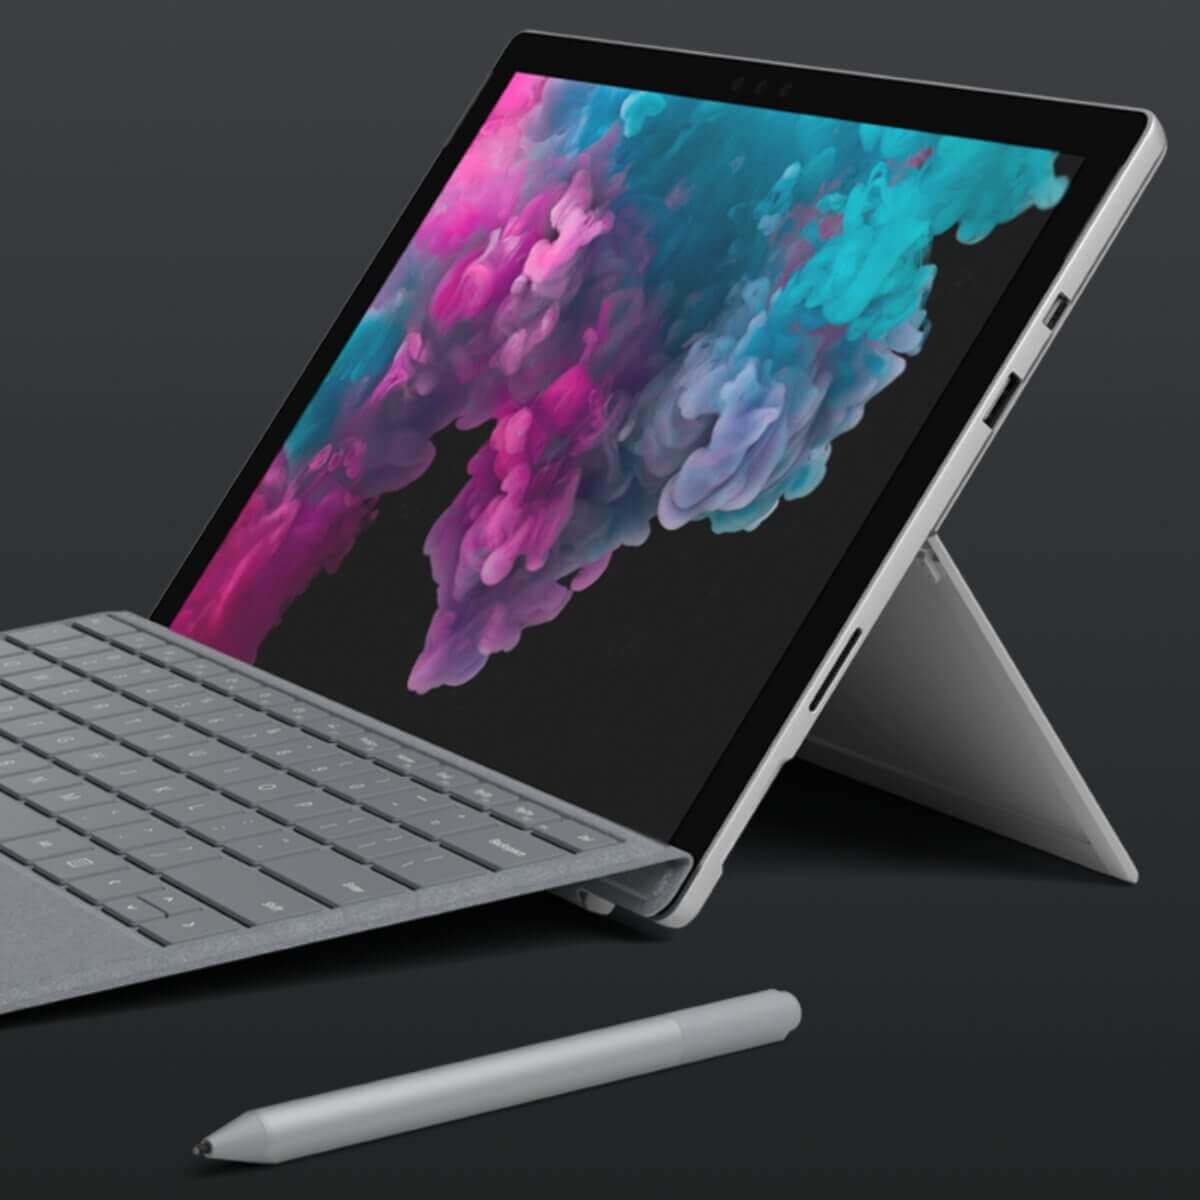 Microsoft Surface updates cause massive CPU throttling issues